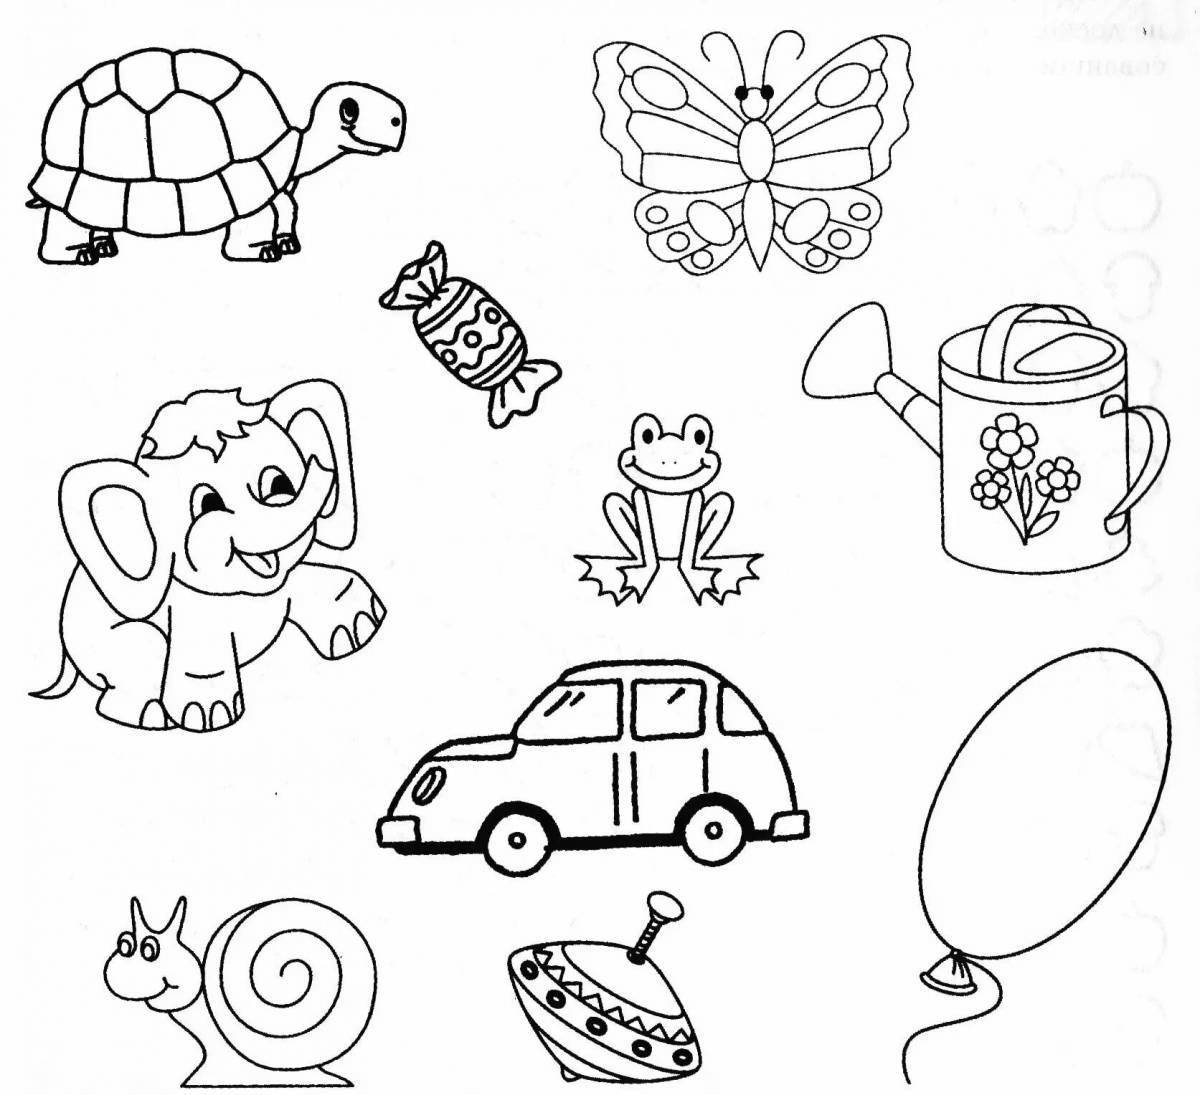 Amazing coloring book for little games